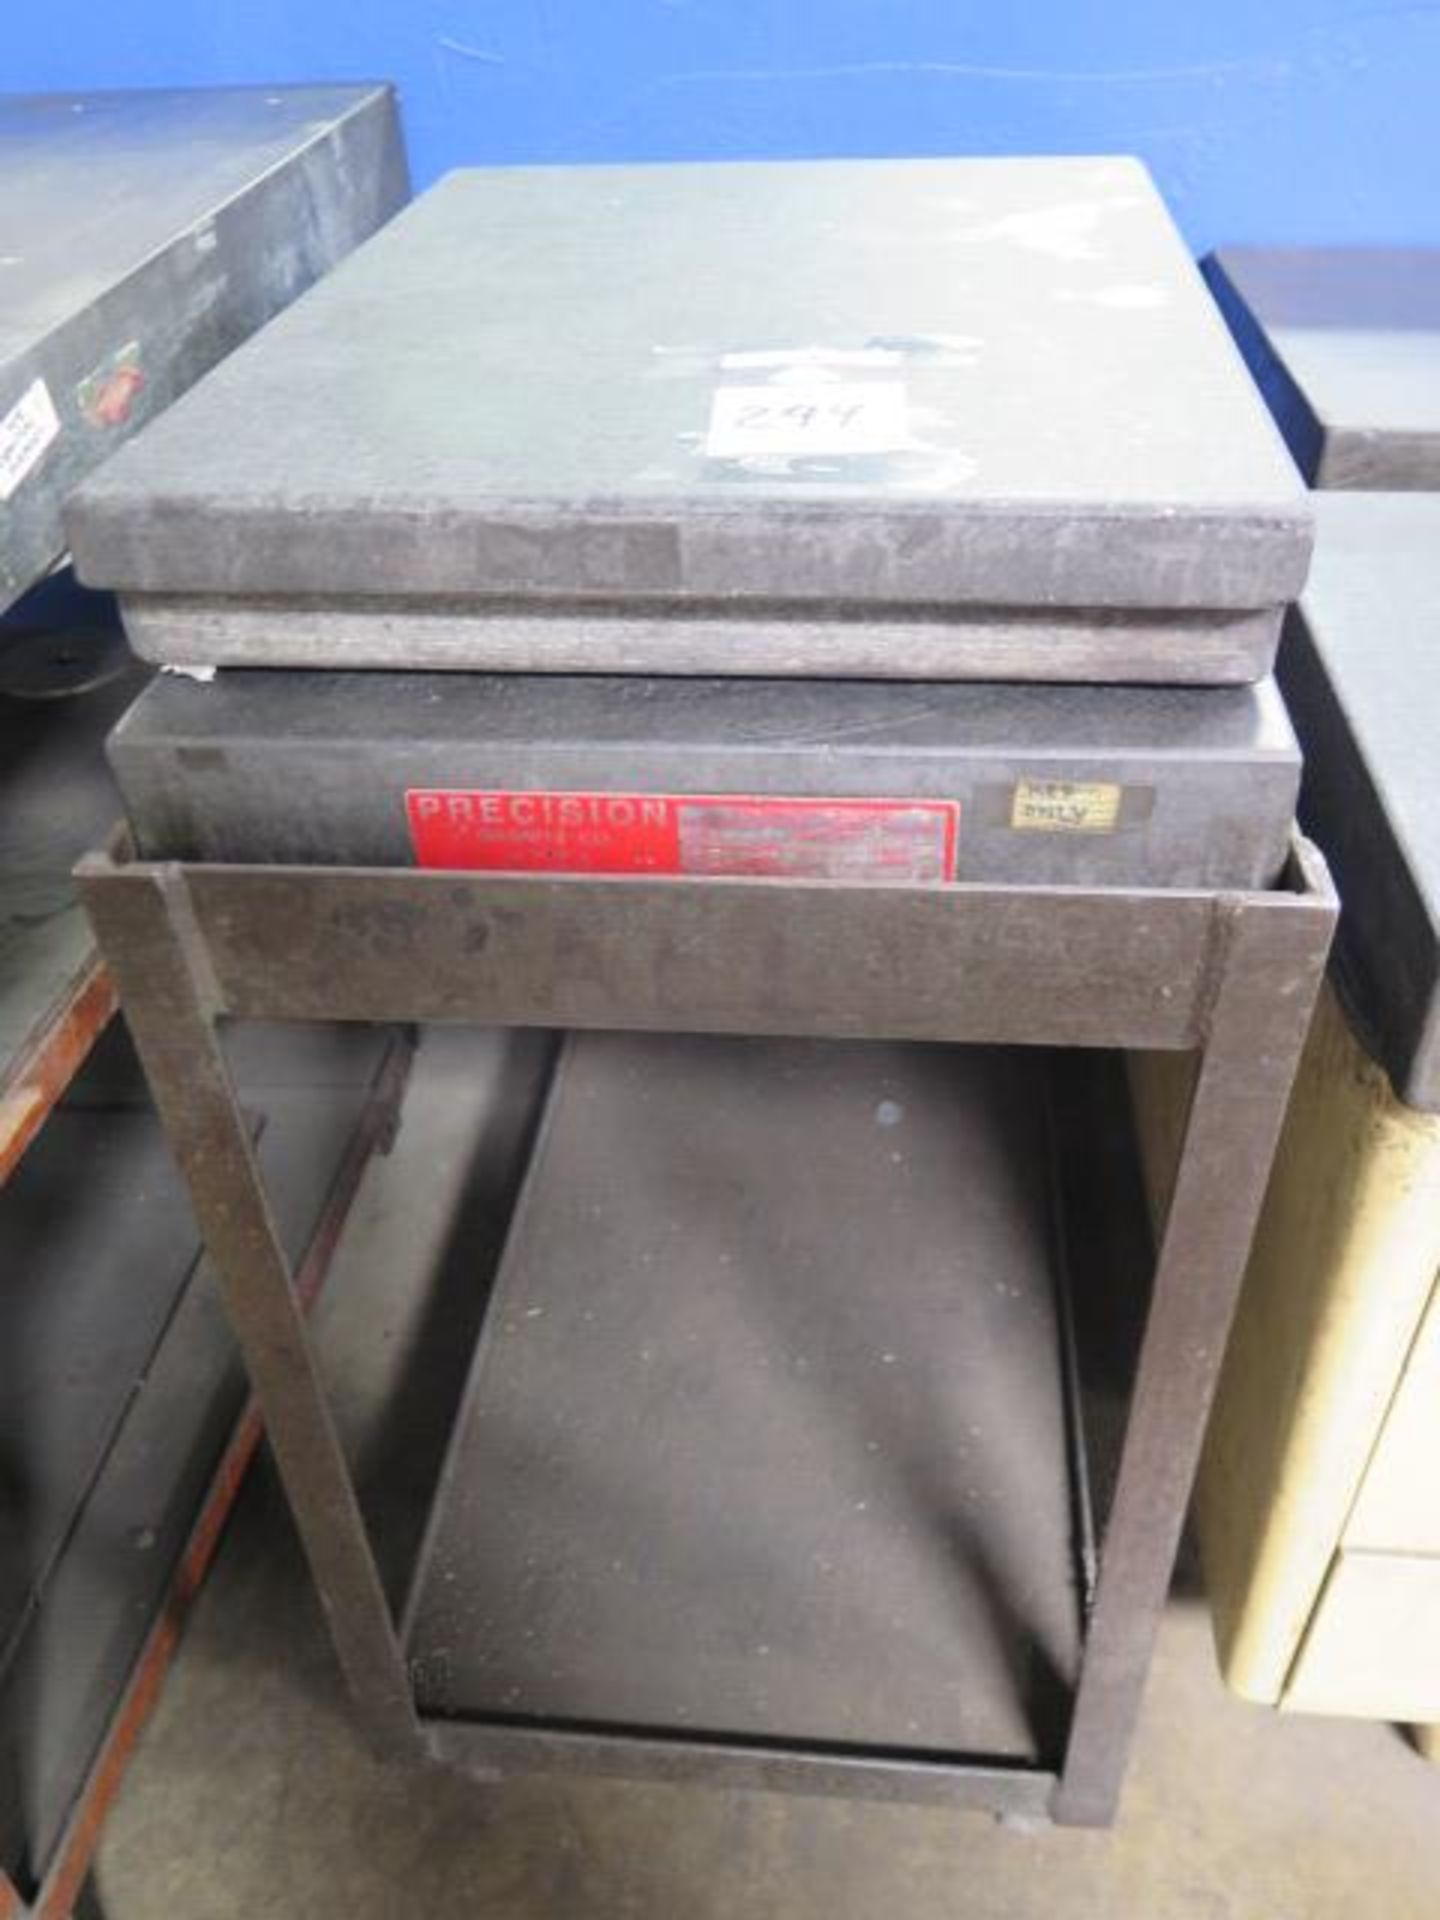 18" x 24" x 3" Granite Surface Plates (2) w/ Cart (SOLD AS-IS - NO WARRANTY) - Image 2 of 5